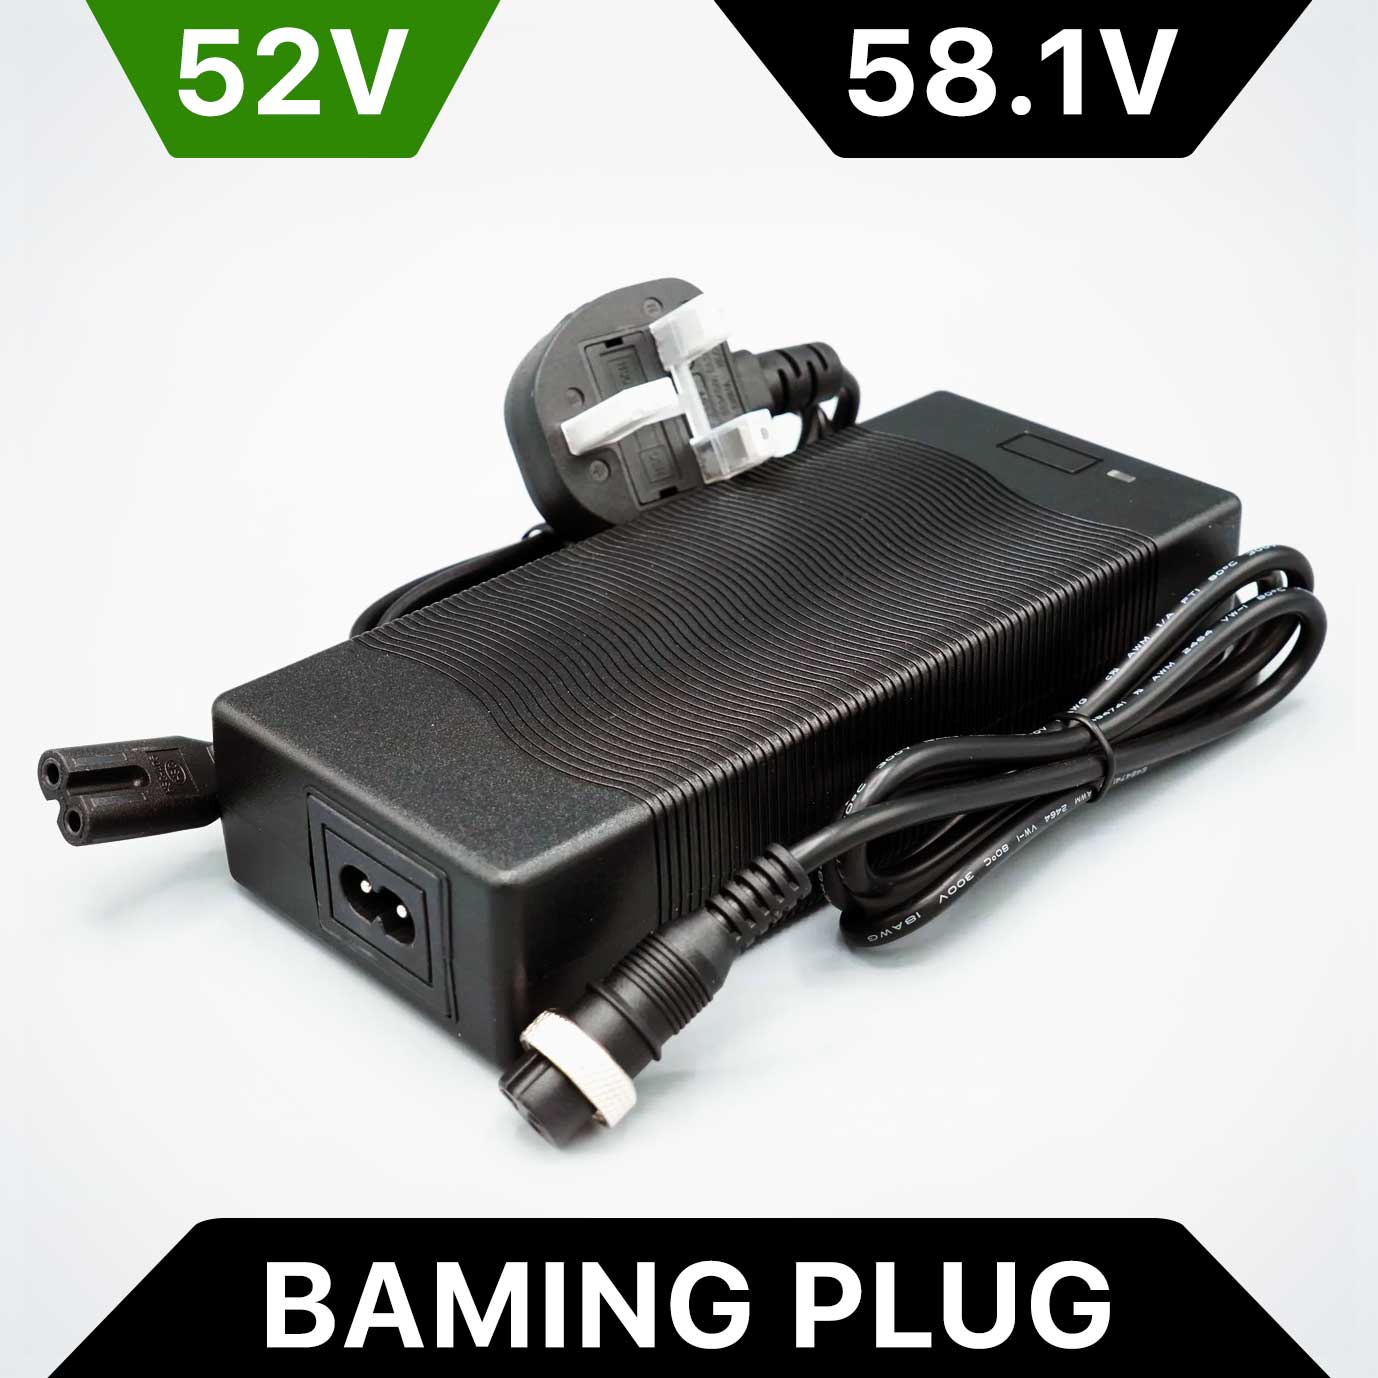 52V 2A Slow Charger for Dualtron, 58.1V Max, Baming Plug